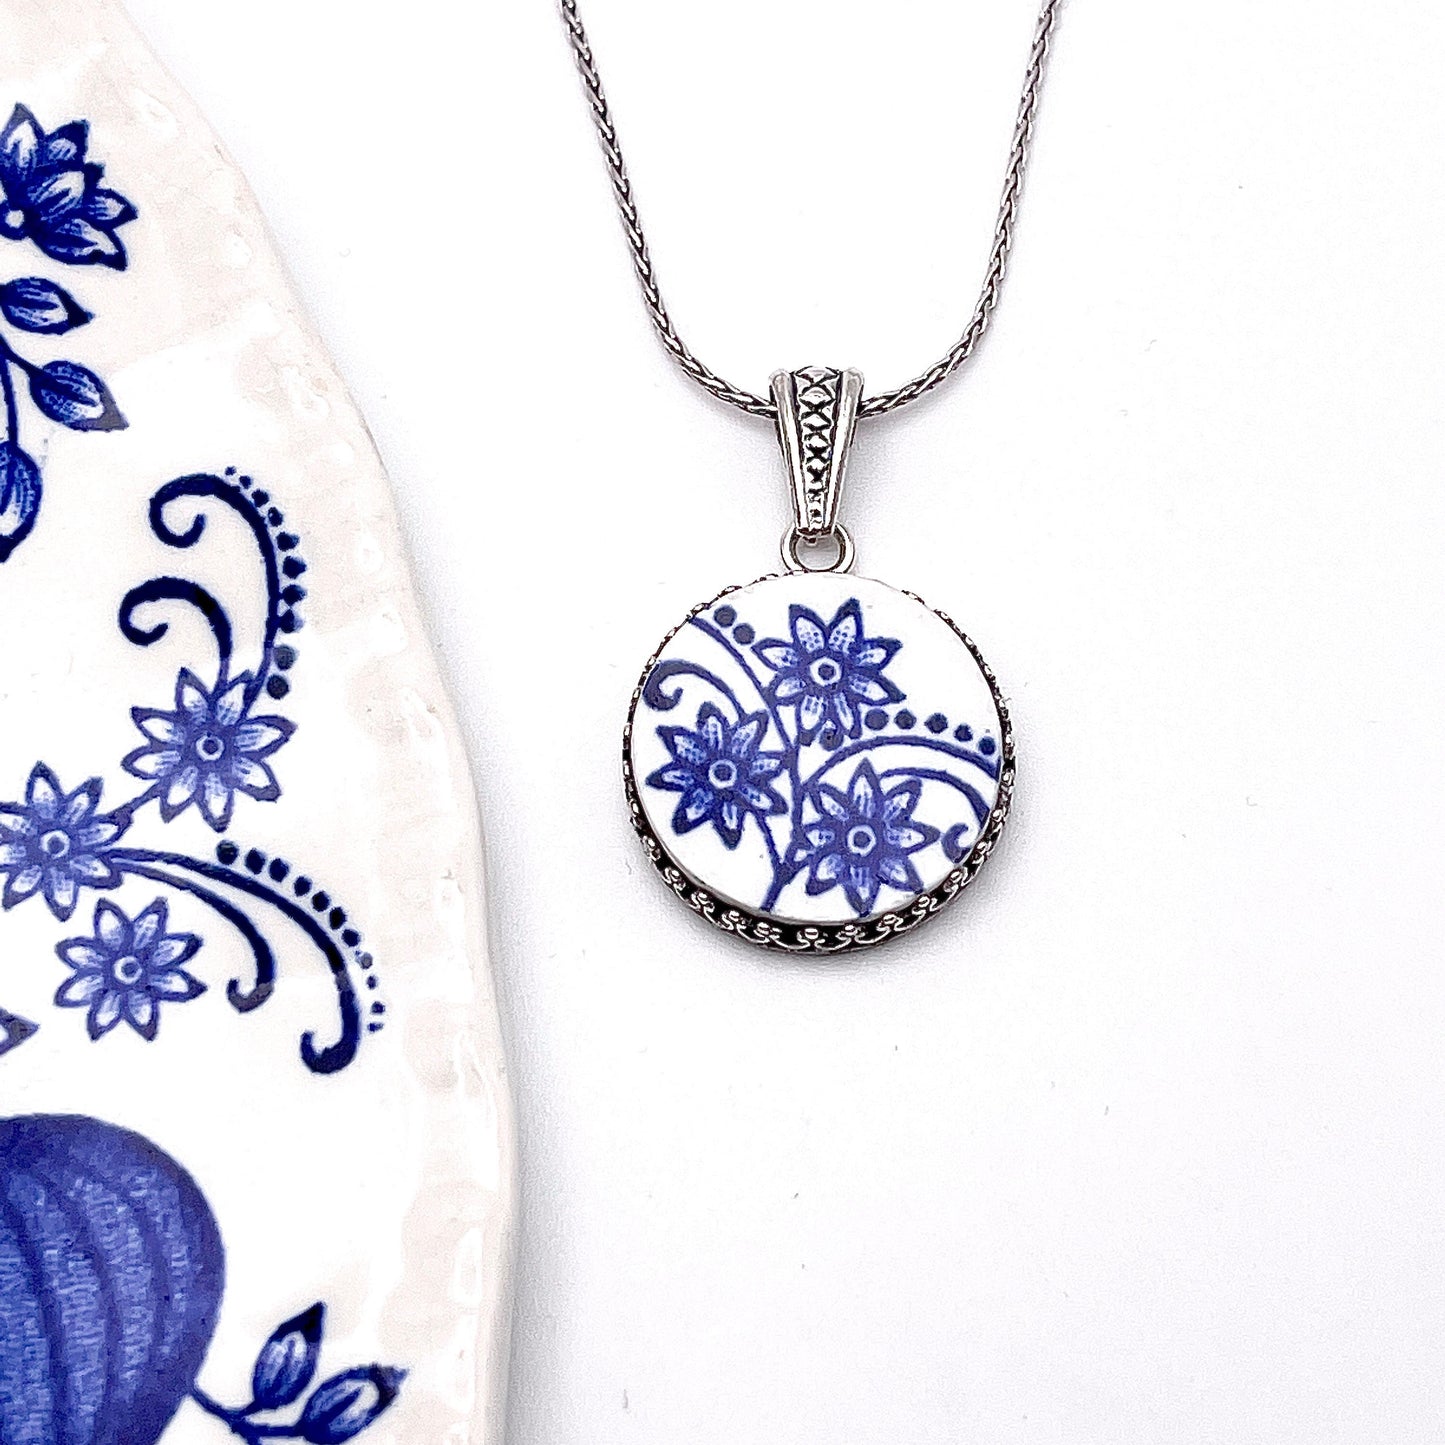 Adjustable Blue Onion Vintage China Necklace, Sterling Silver Broken China Jewelry, Unique Gifts for Women